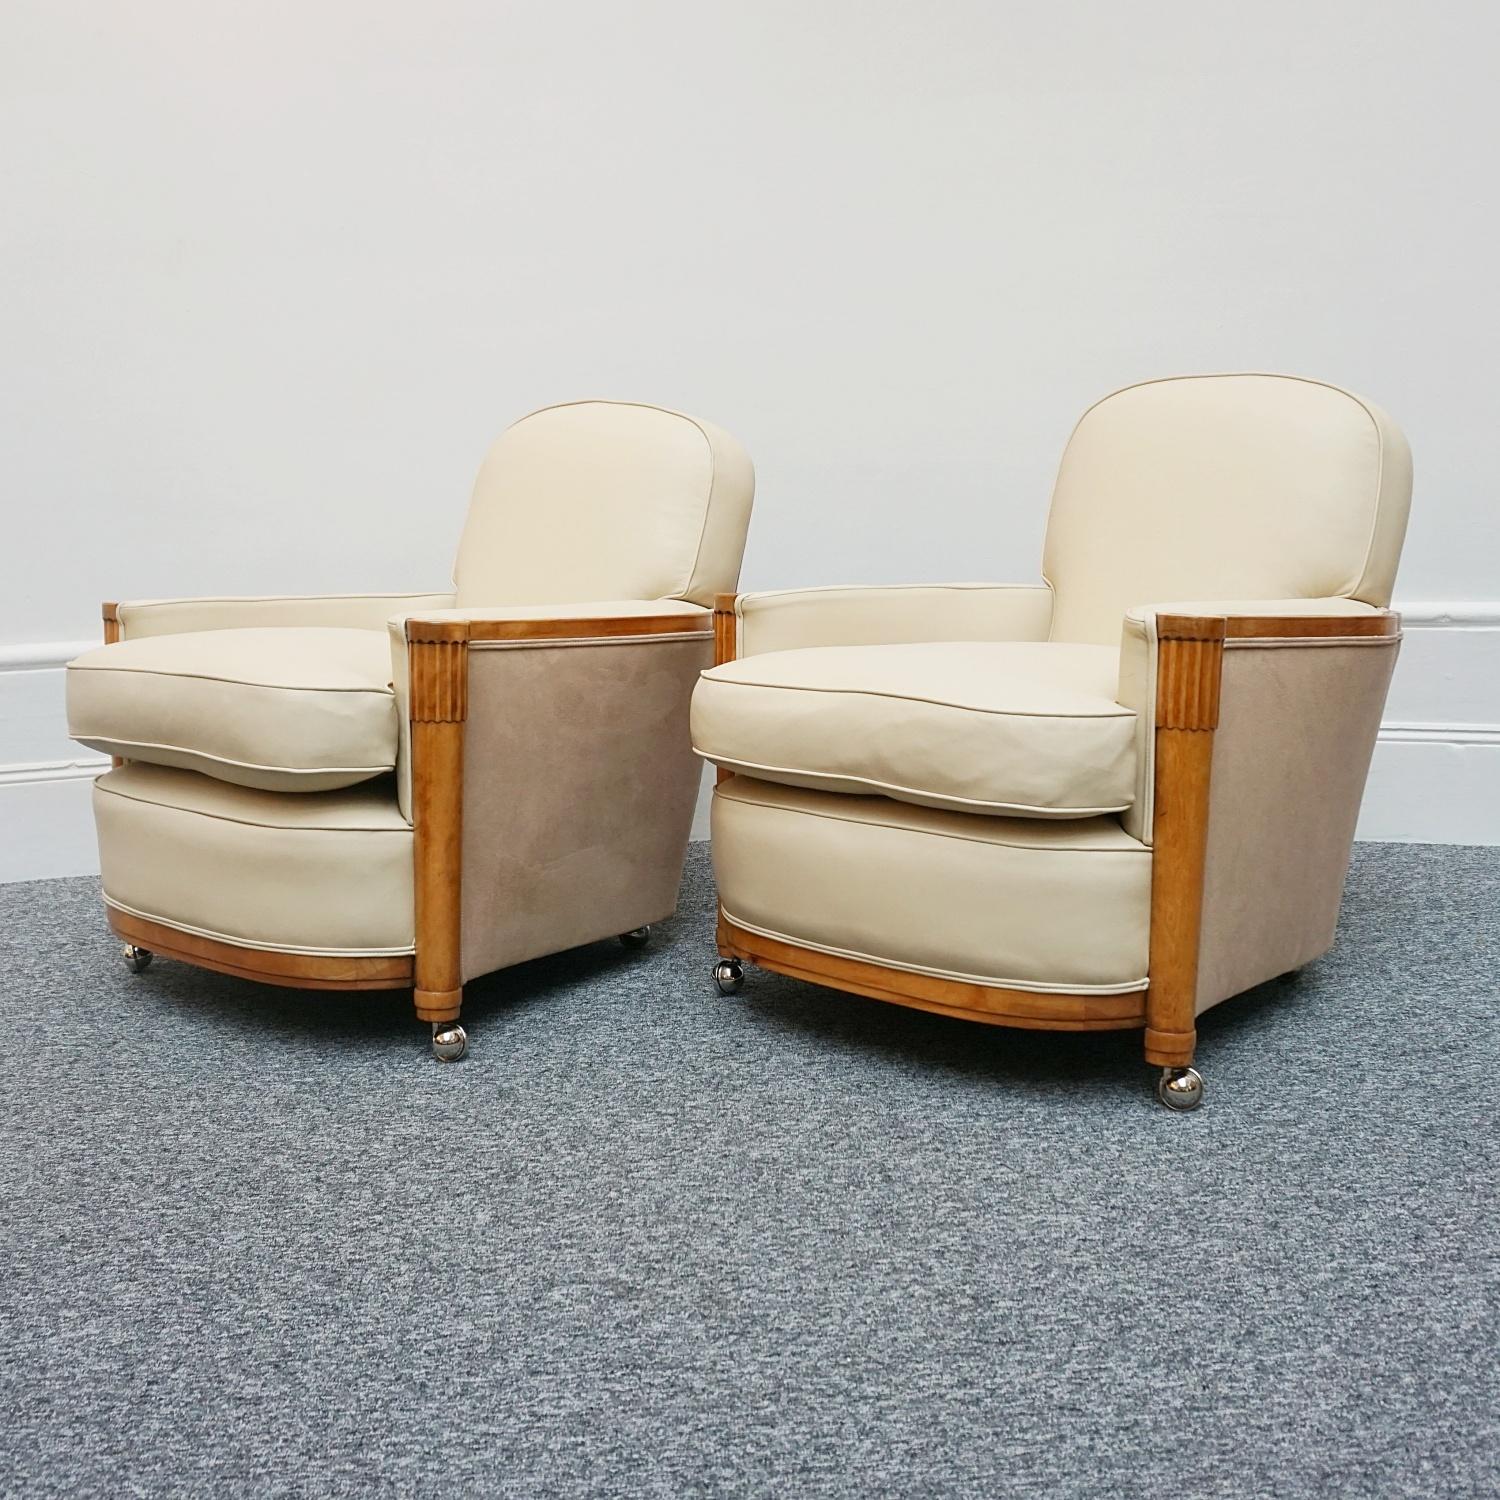 Pair of Art Deco Lounge Chairs by Maurice Adams Cream Leather and Satinwood  6